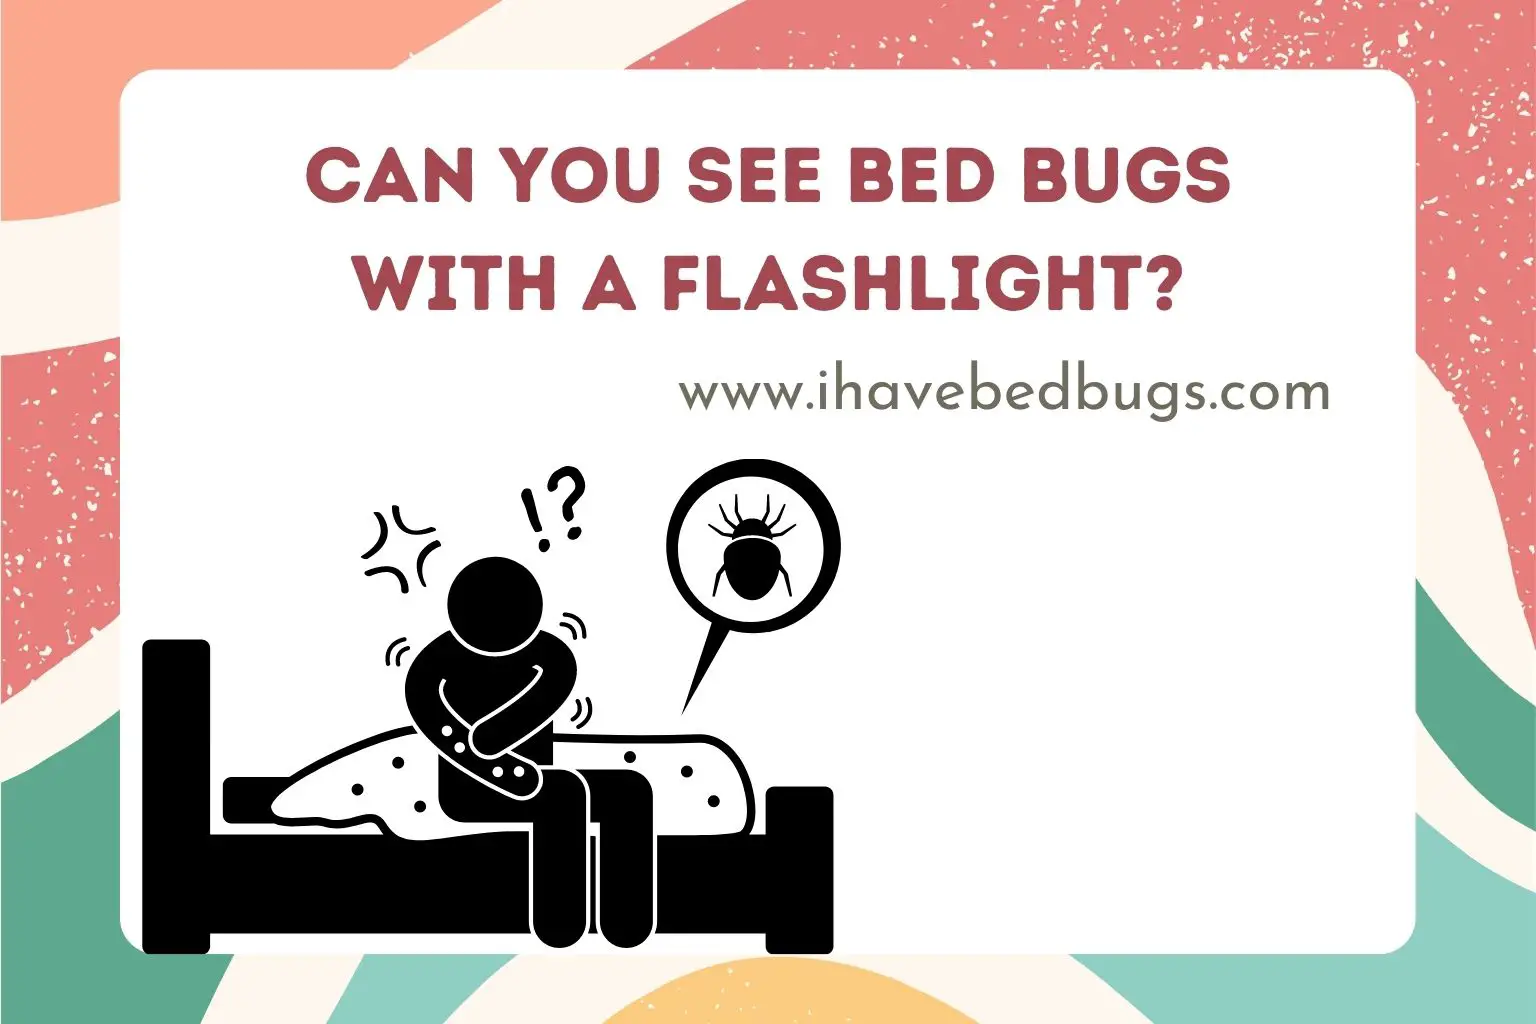 Can you see bed bugs with a flashlight